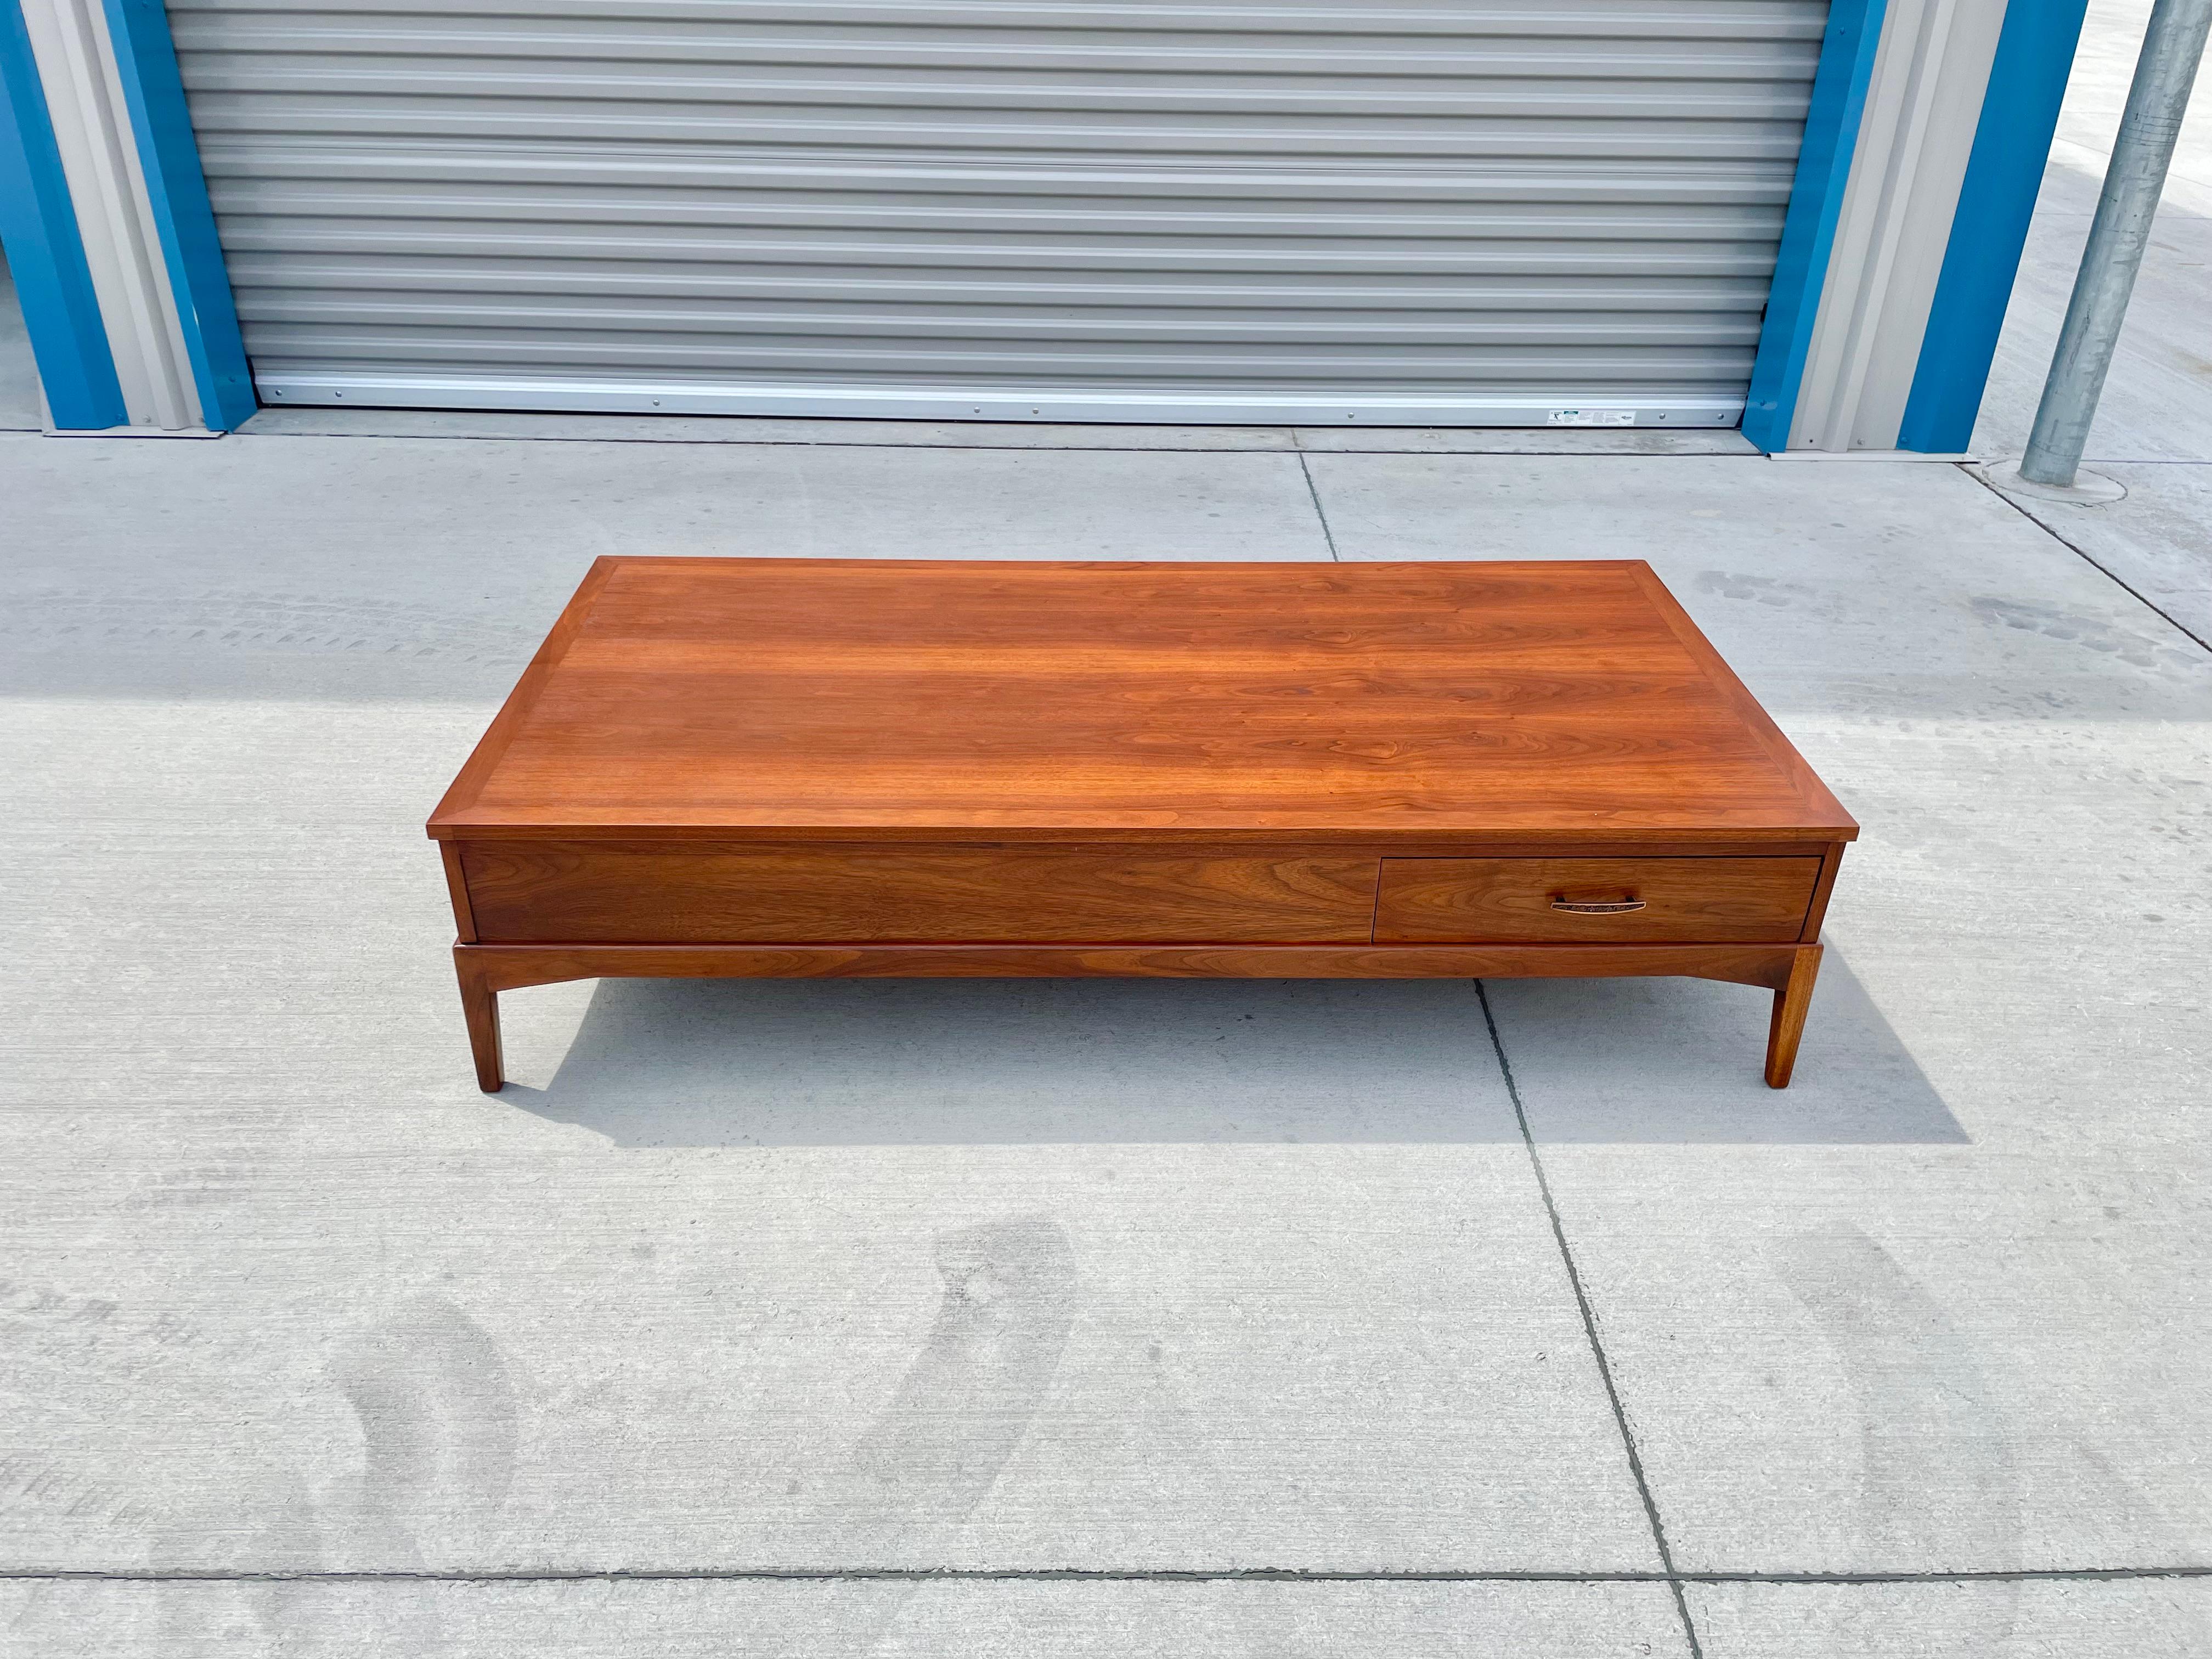 Mid-century walnut coffee table designed and manufactured by Lane in the United States circa 1960s. This fantastic coffee table features a walnut frame with one pull-out drawer that pulls out both ways, the perfect addition for your home or office.